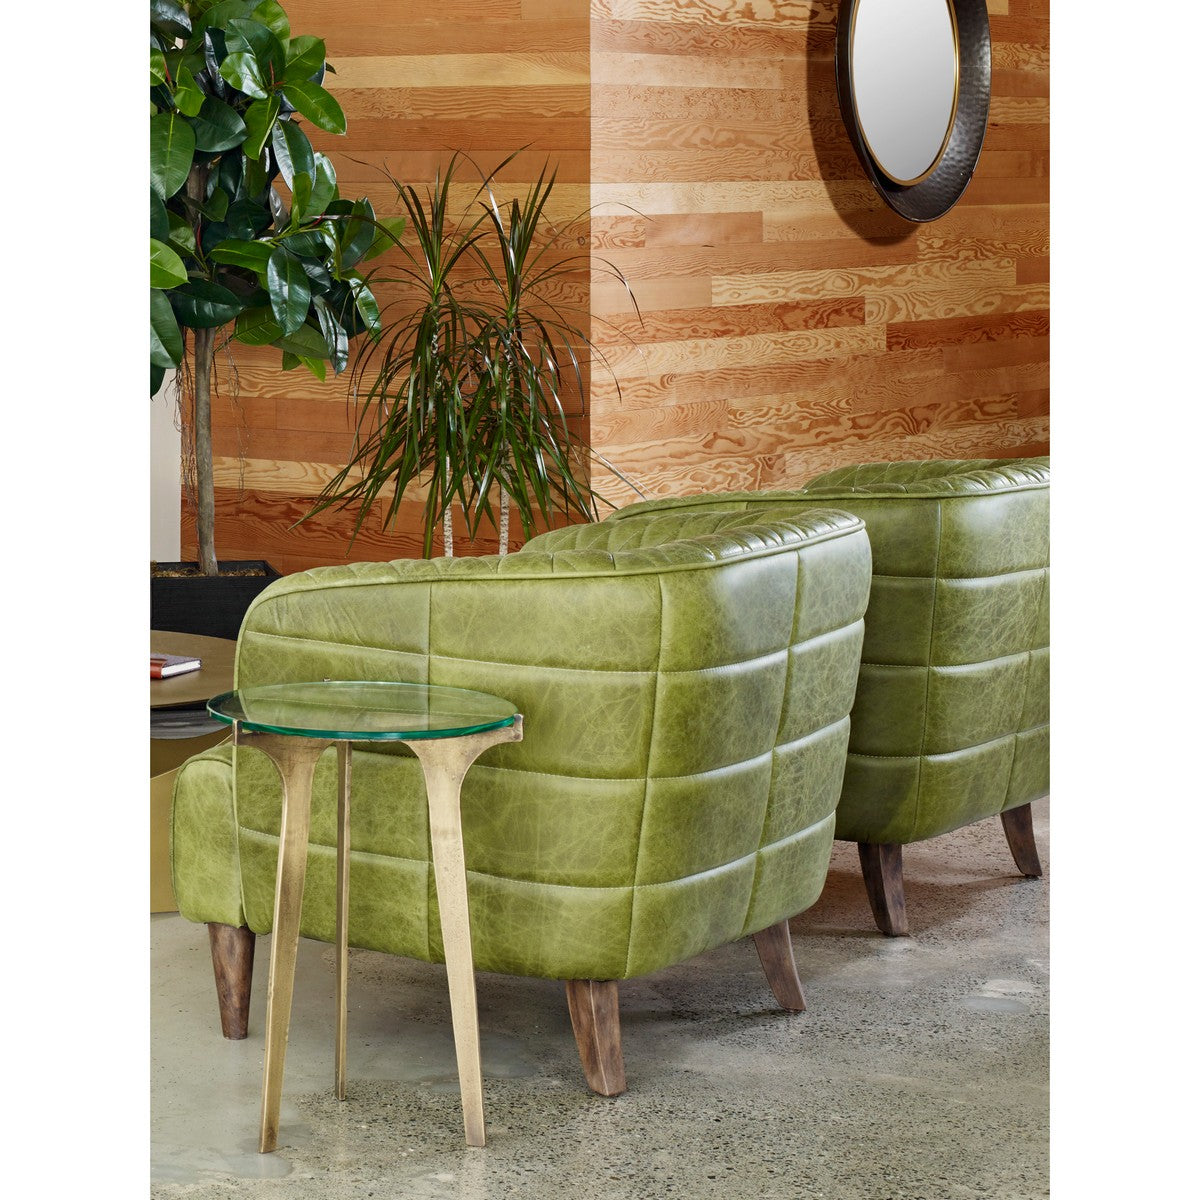 Moe's Home Collection Magdelan Tufted Leather Arm Chair Emerald - PK-1076-27 - Moe's Home Collection - lounge chairs - Minimal And Modern - 1